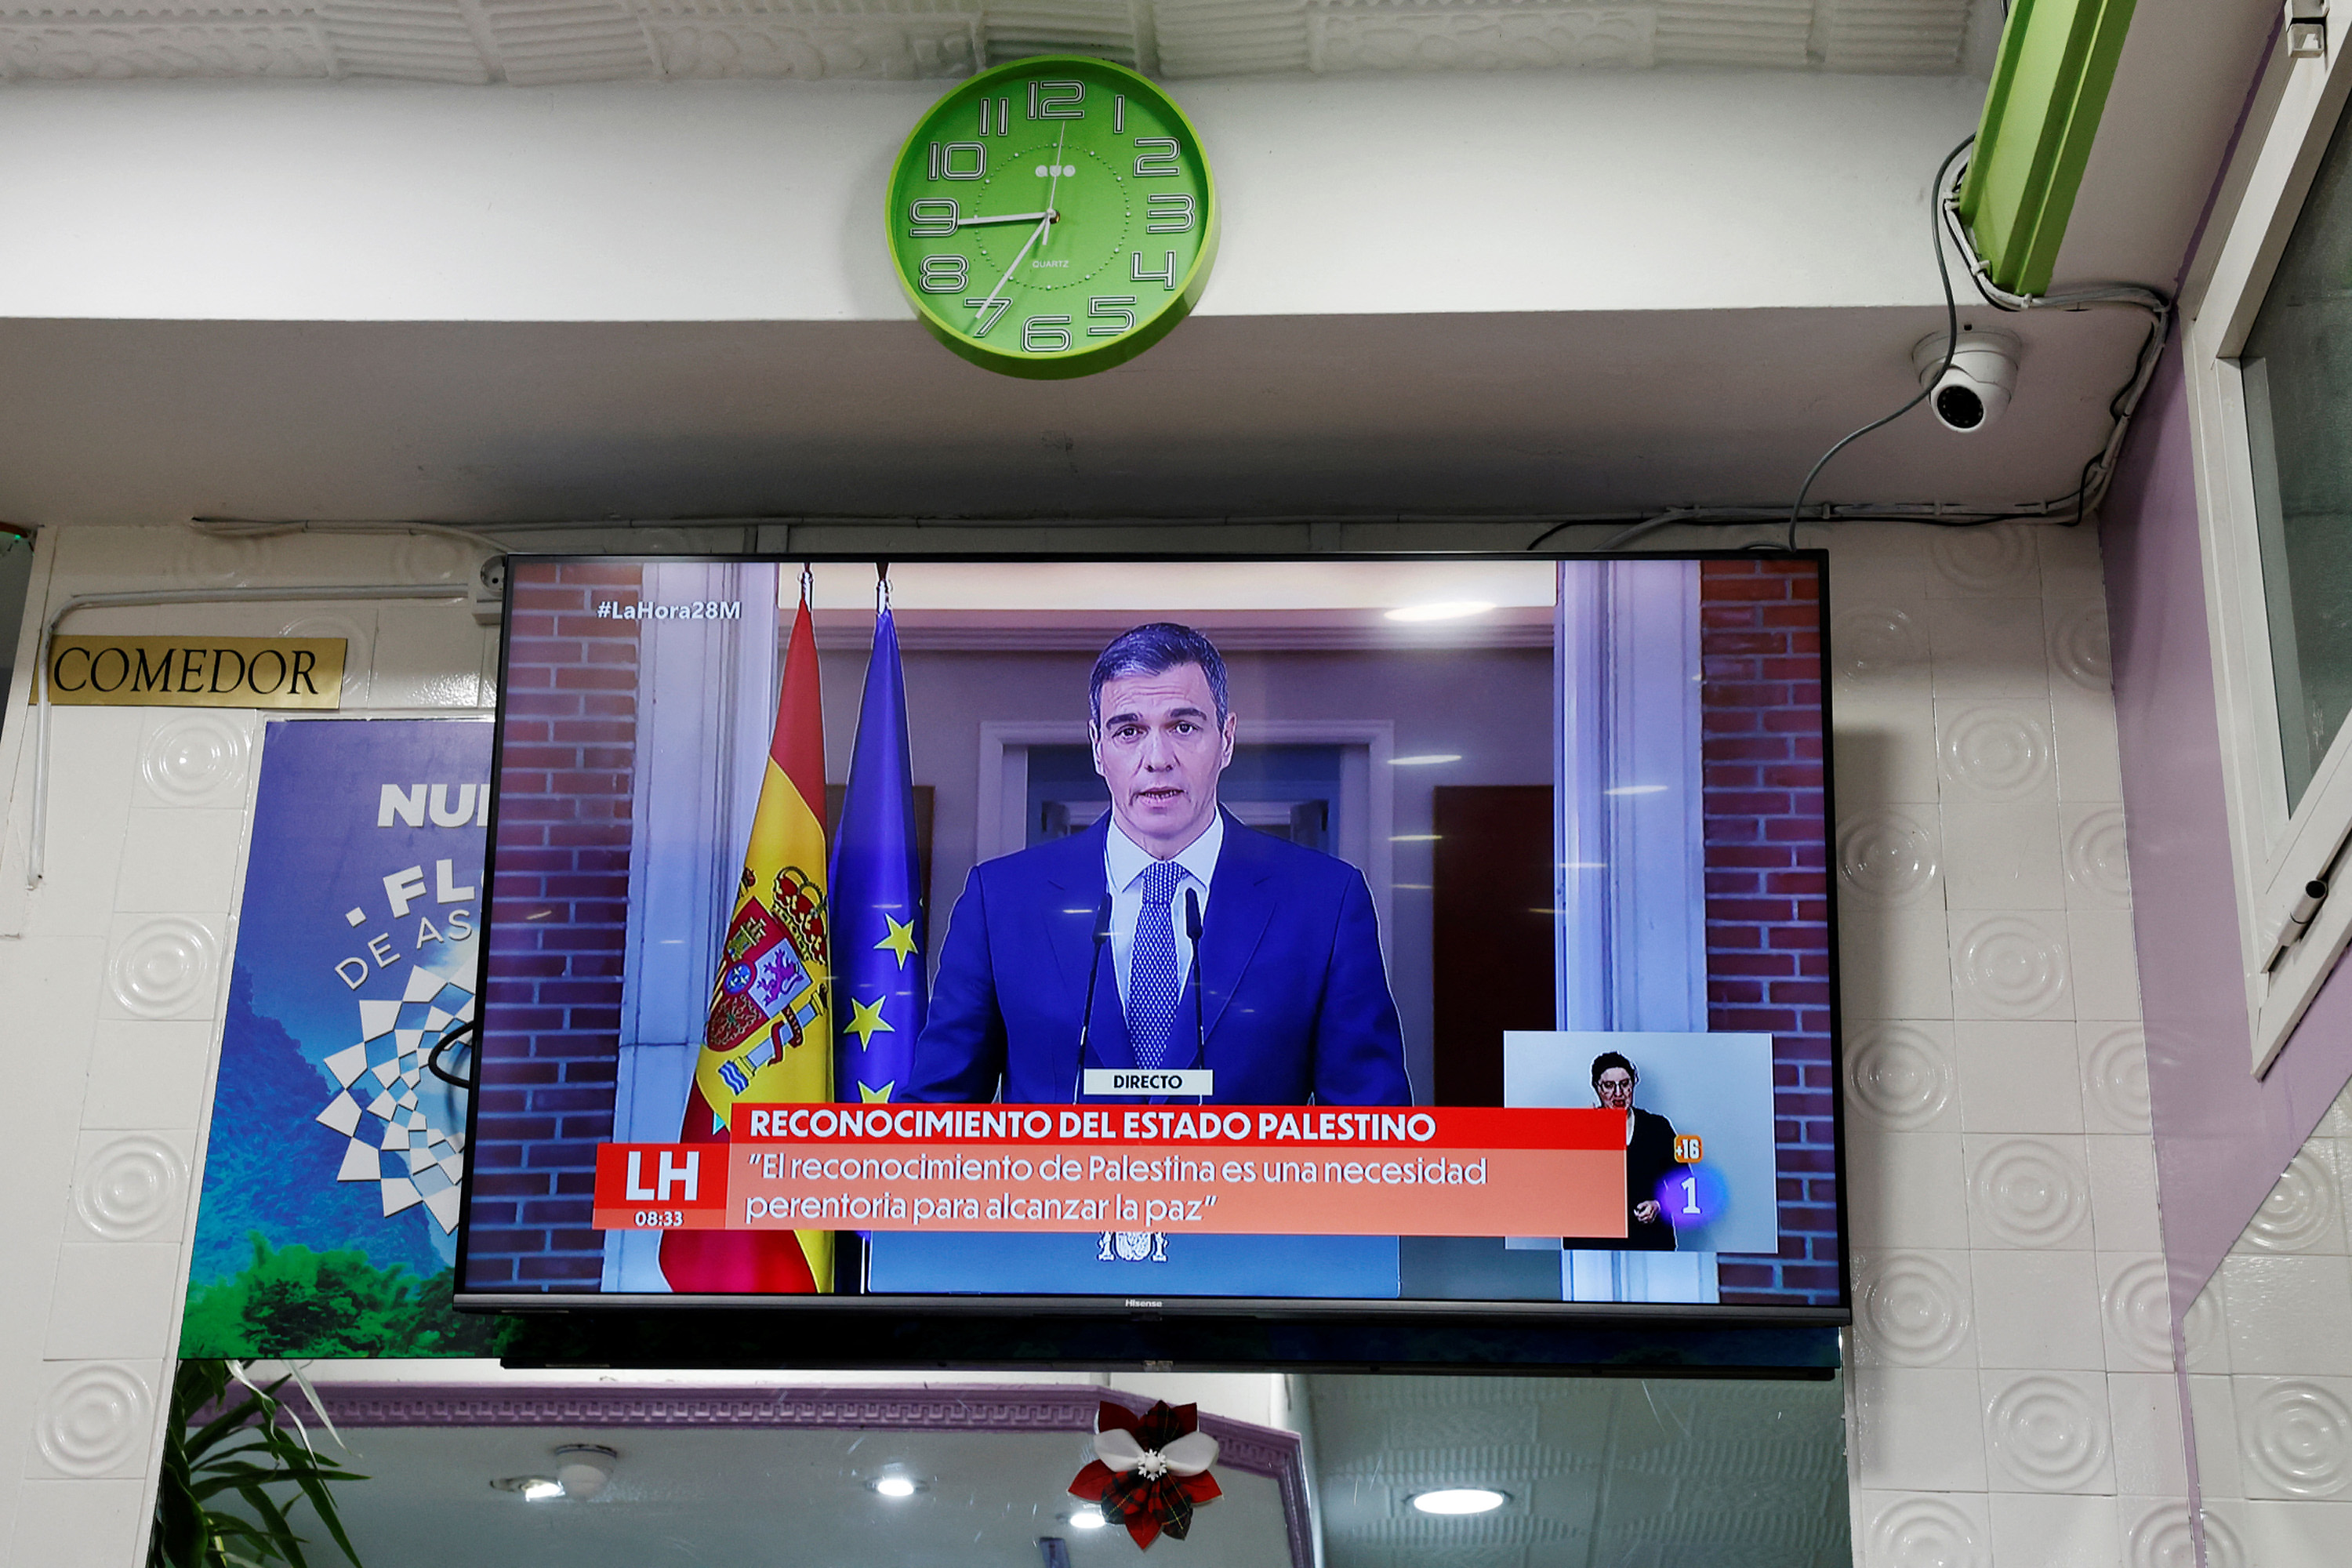 Spain's Prime Minister Pedro Sanchez is seen on a screen in a bar in Madrid, Spain, during a live news TV broadcast announcing Spain's recognition of the Palestinian state, on May 28.